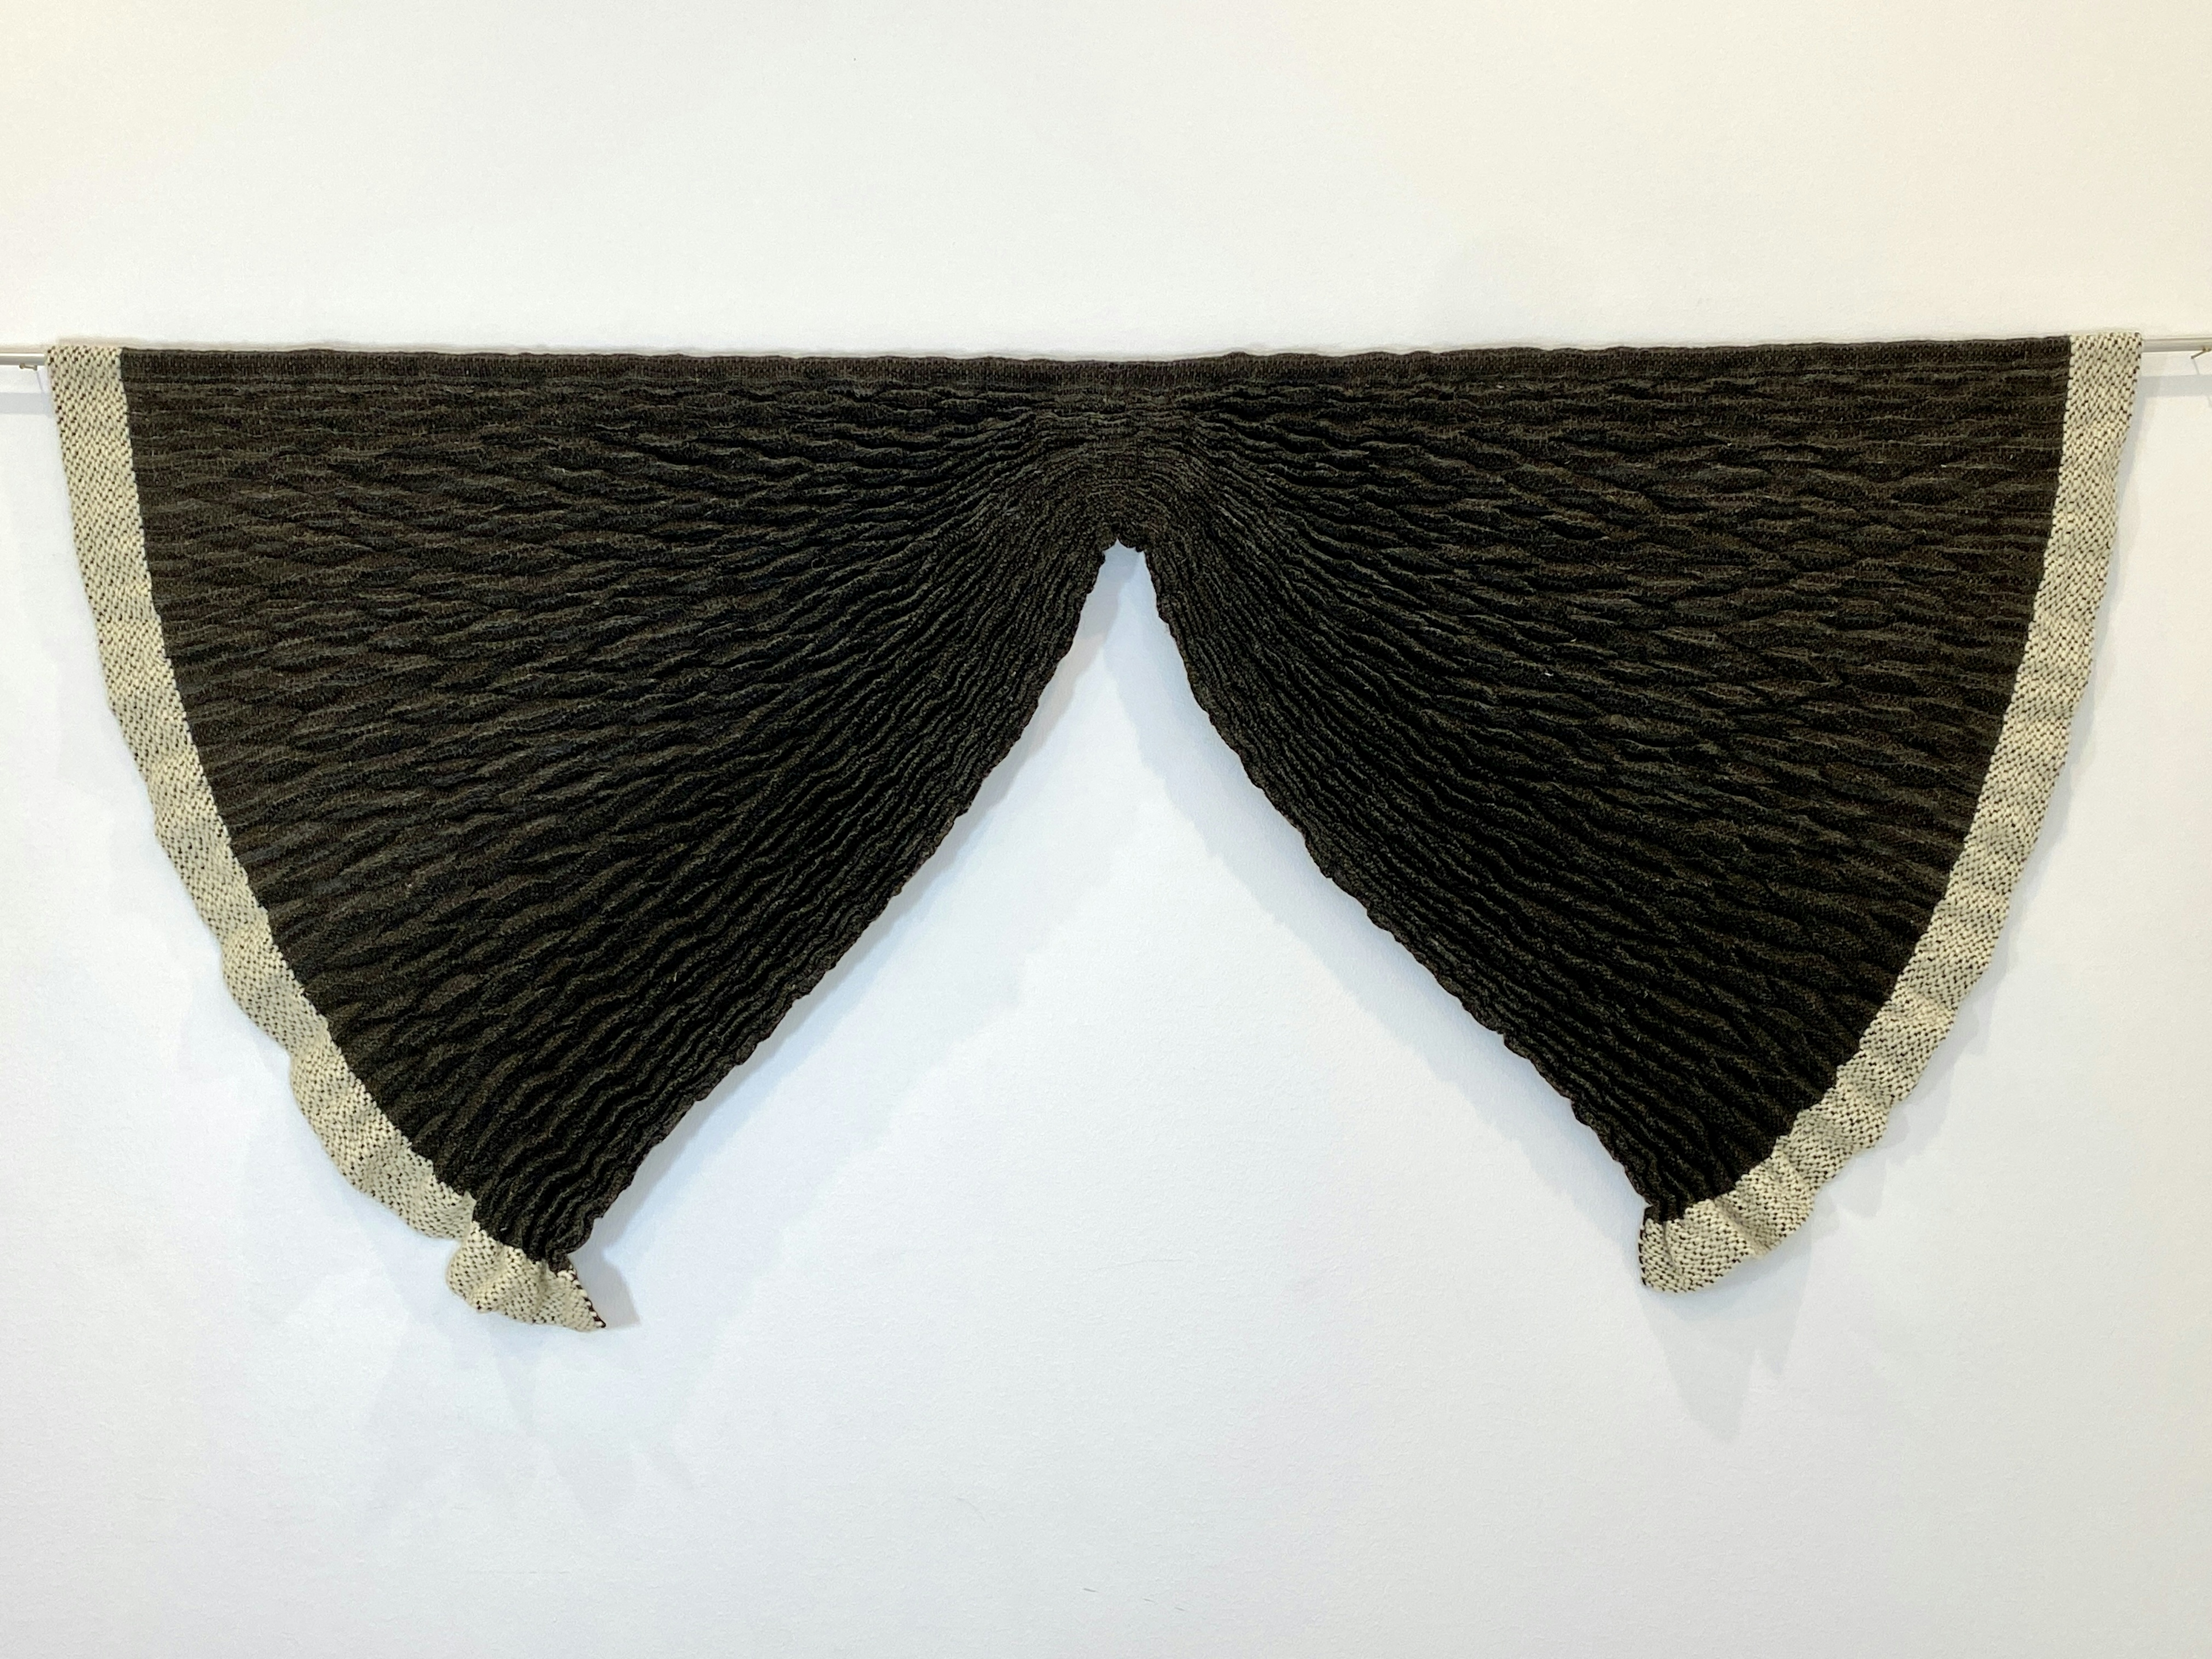 Under the protection of darkness. 2021. Wool. Handwoven. 160 x 80 cm